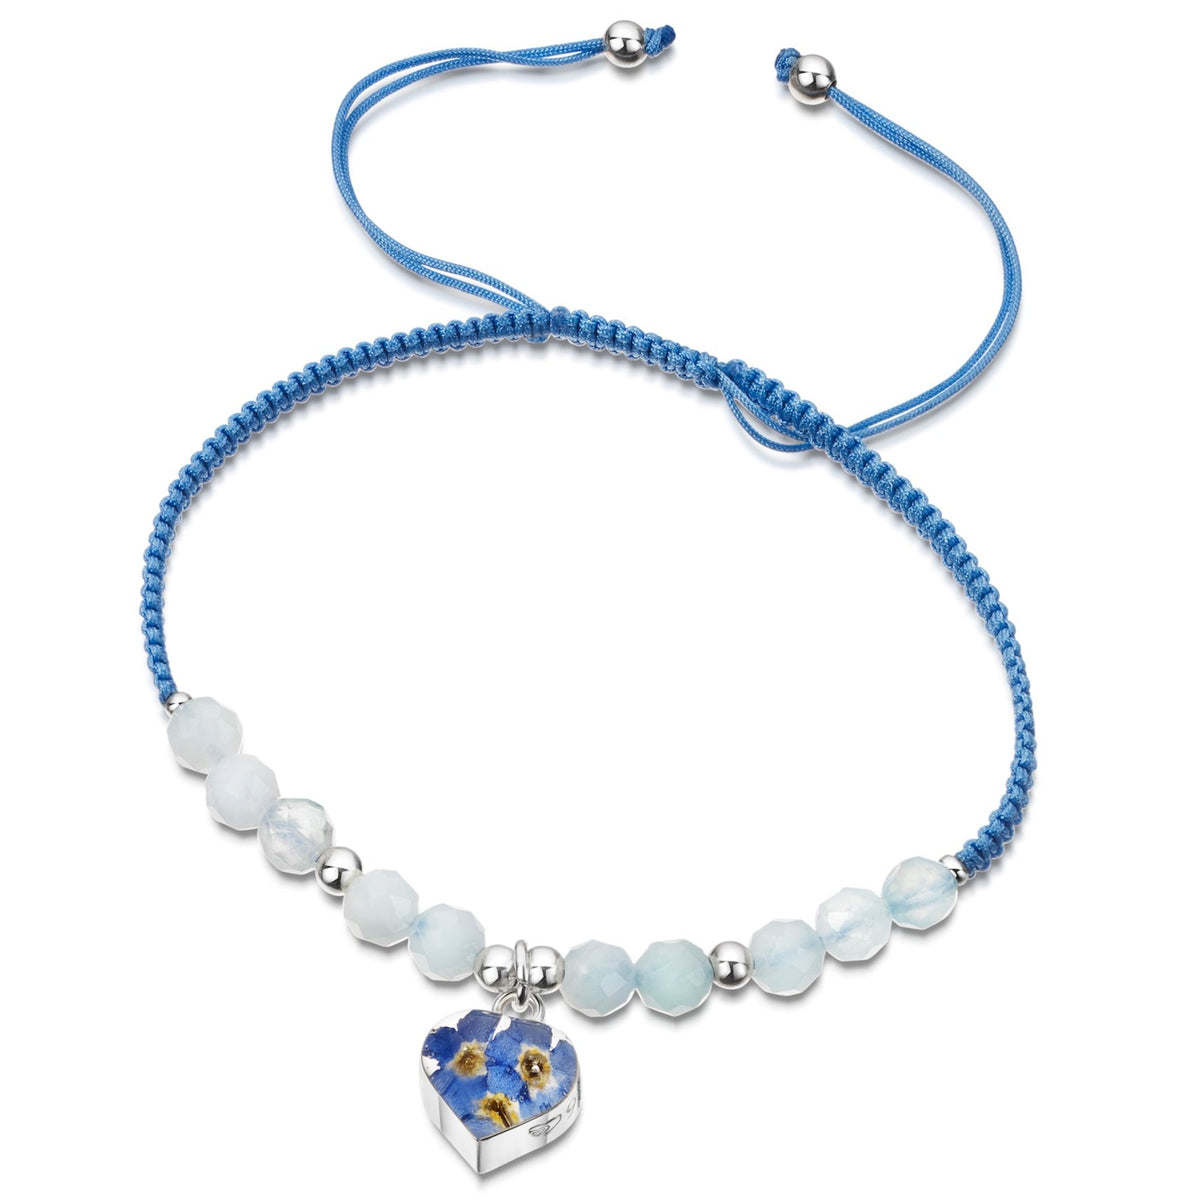 Handwoven, threaded bracelet of sky blue nylon with aquamarine beads, sterling silver beads and a  central sterling silver heart-shaped charm with real forget-me-not flowers set in resin.